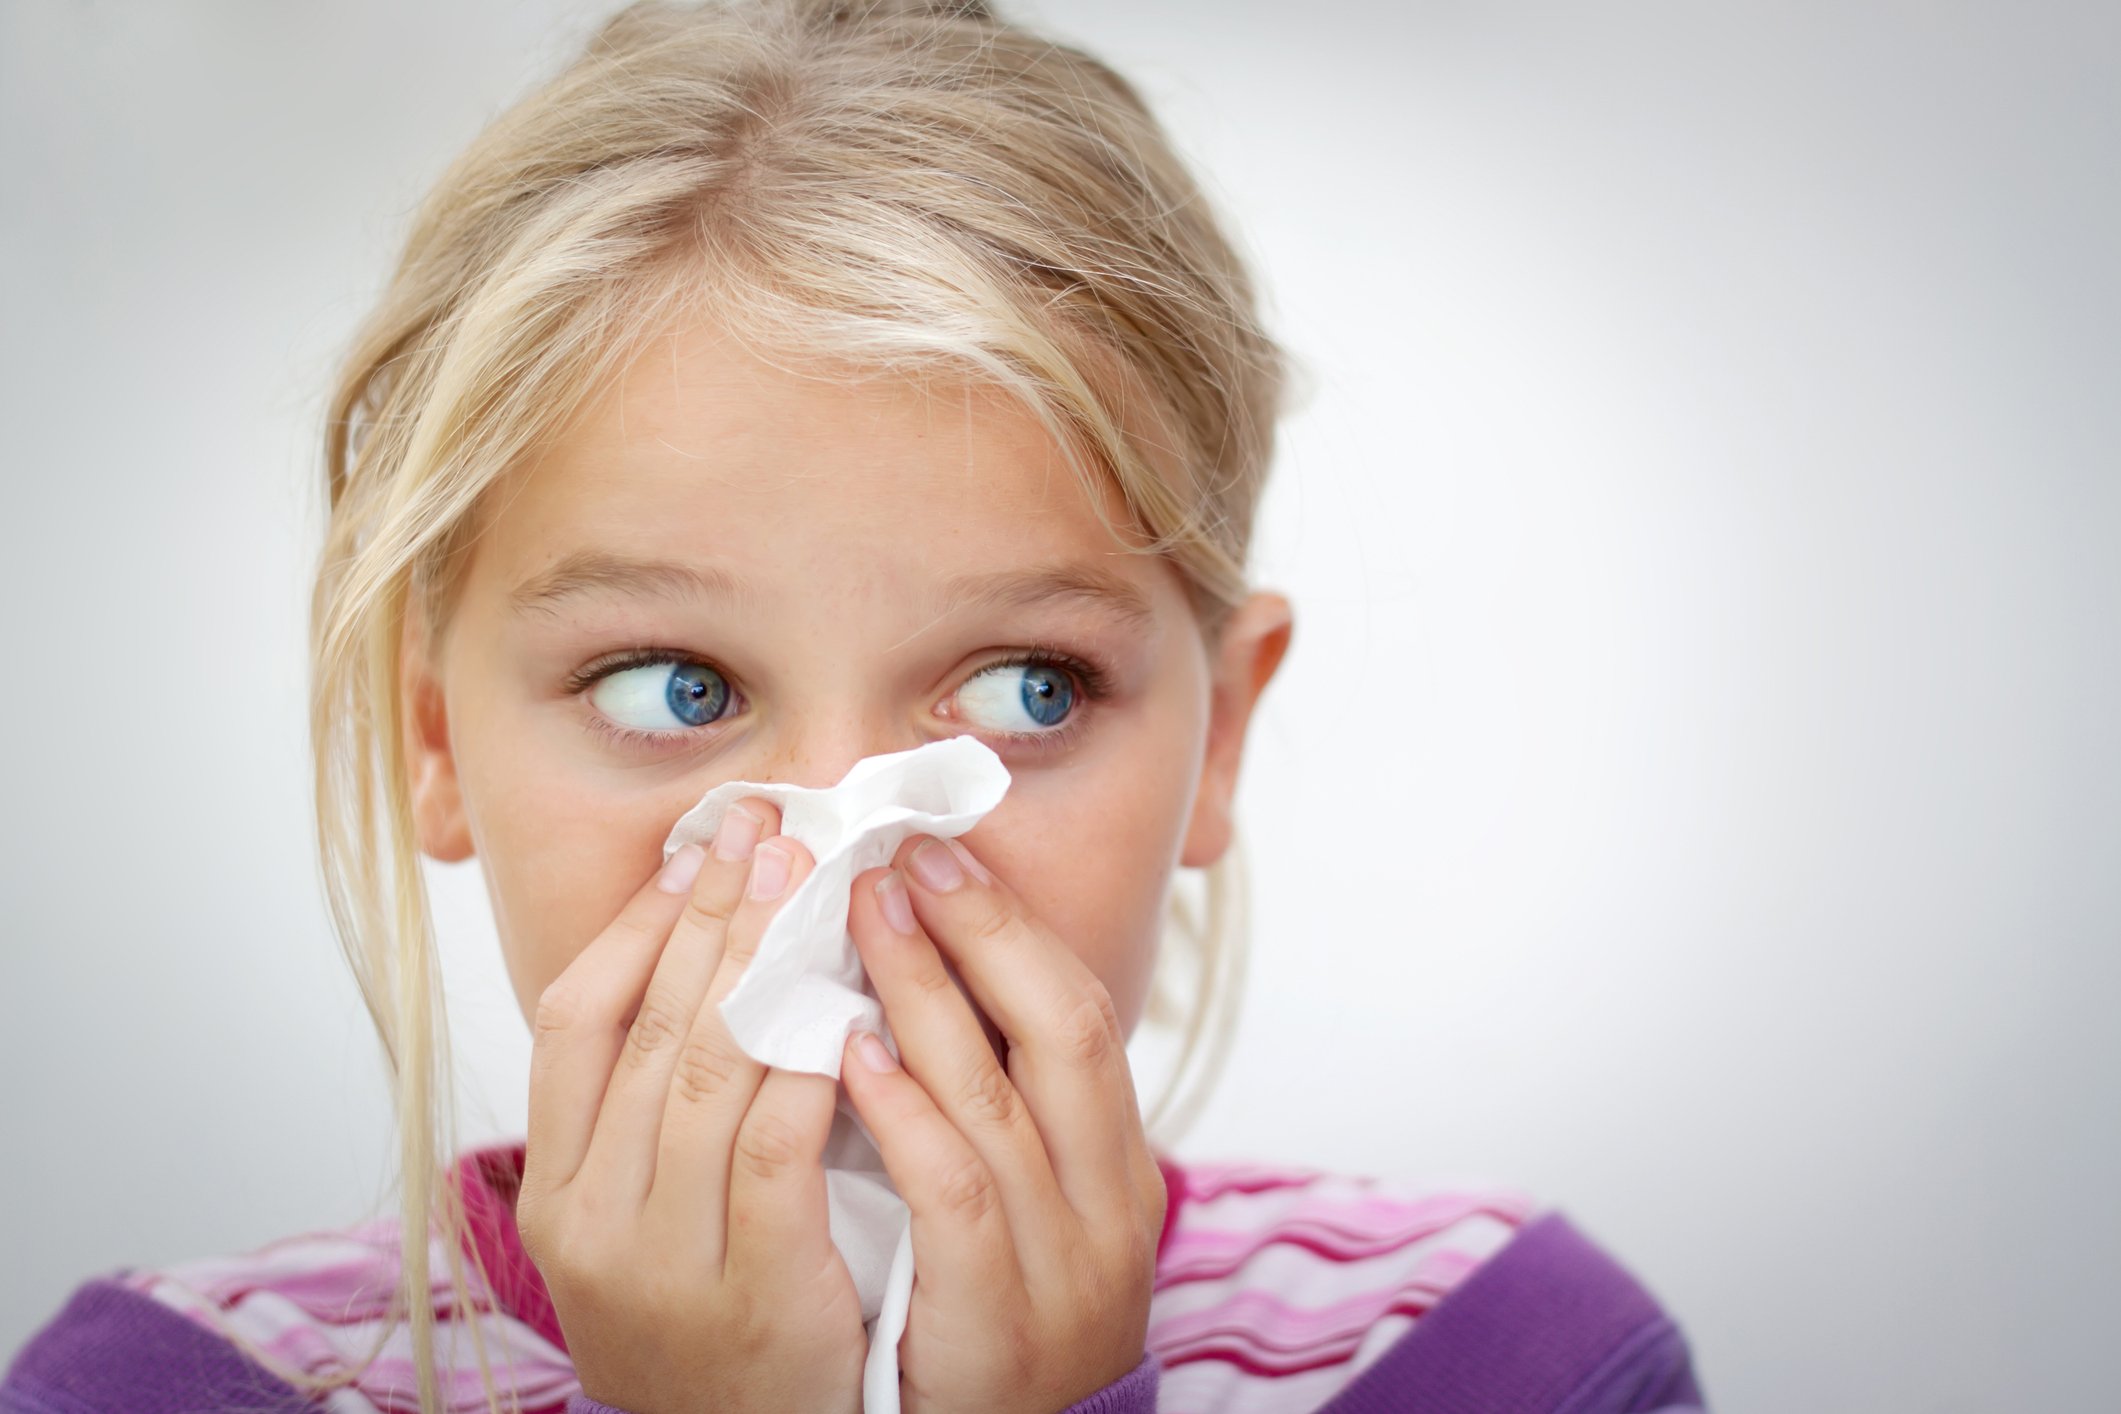 How to Help Your Baby or Toddler Clear a Stuffy Nose